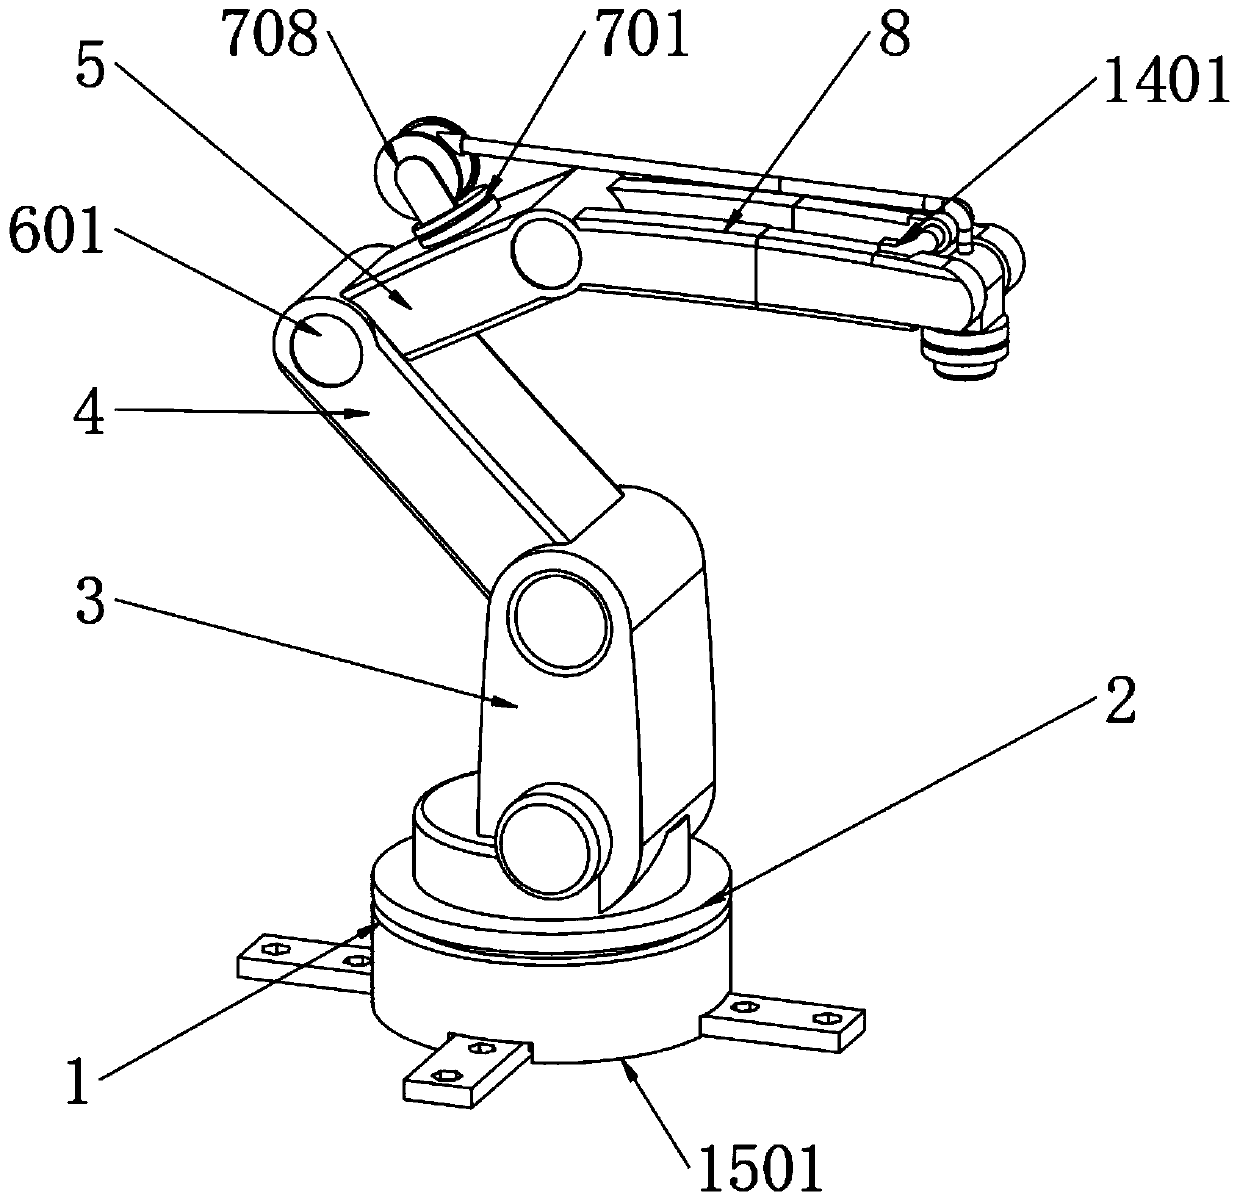 An improved mechanical arm device